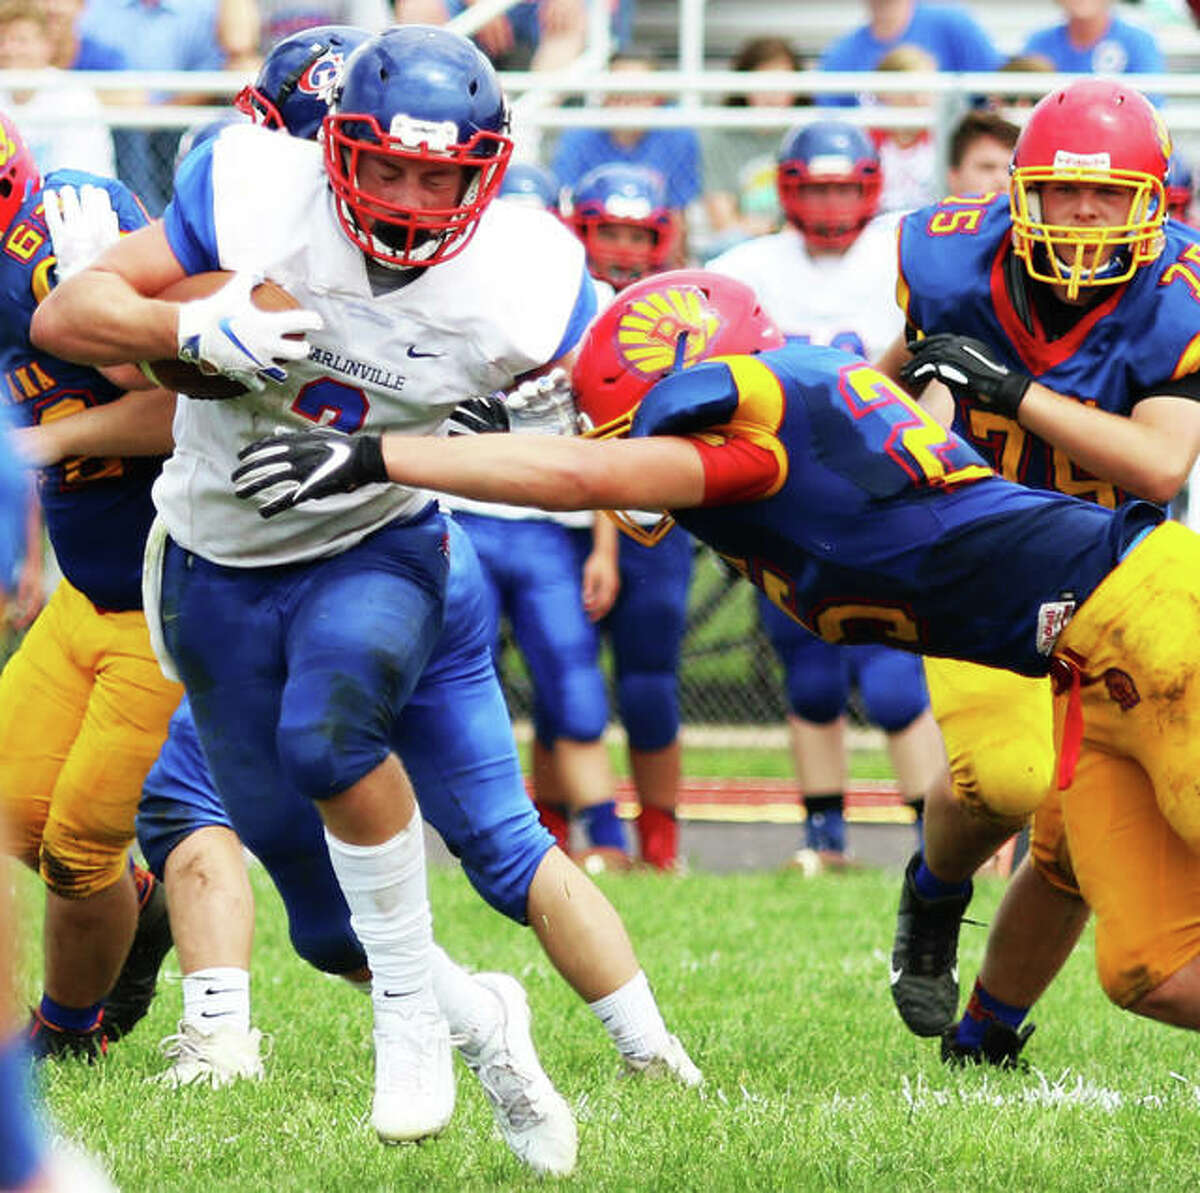 Carlinville’s Colton DeLong (left), shown trying to elude Roxana’s David Pluester in a SCC game in Week 1 at Roxana, rushed for 232 yards and four touchdowns Friday night in the Cavaliers’ SCC victory over Staunton in Carlinville.